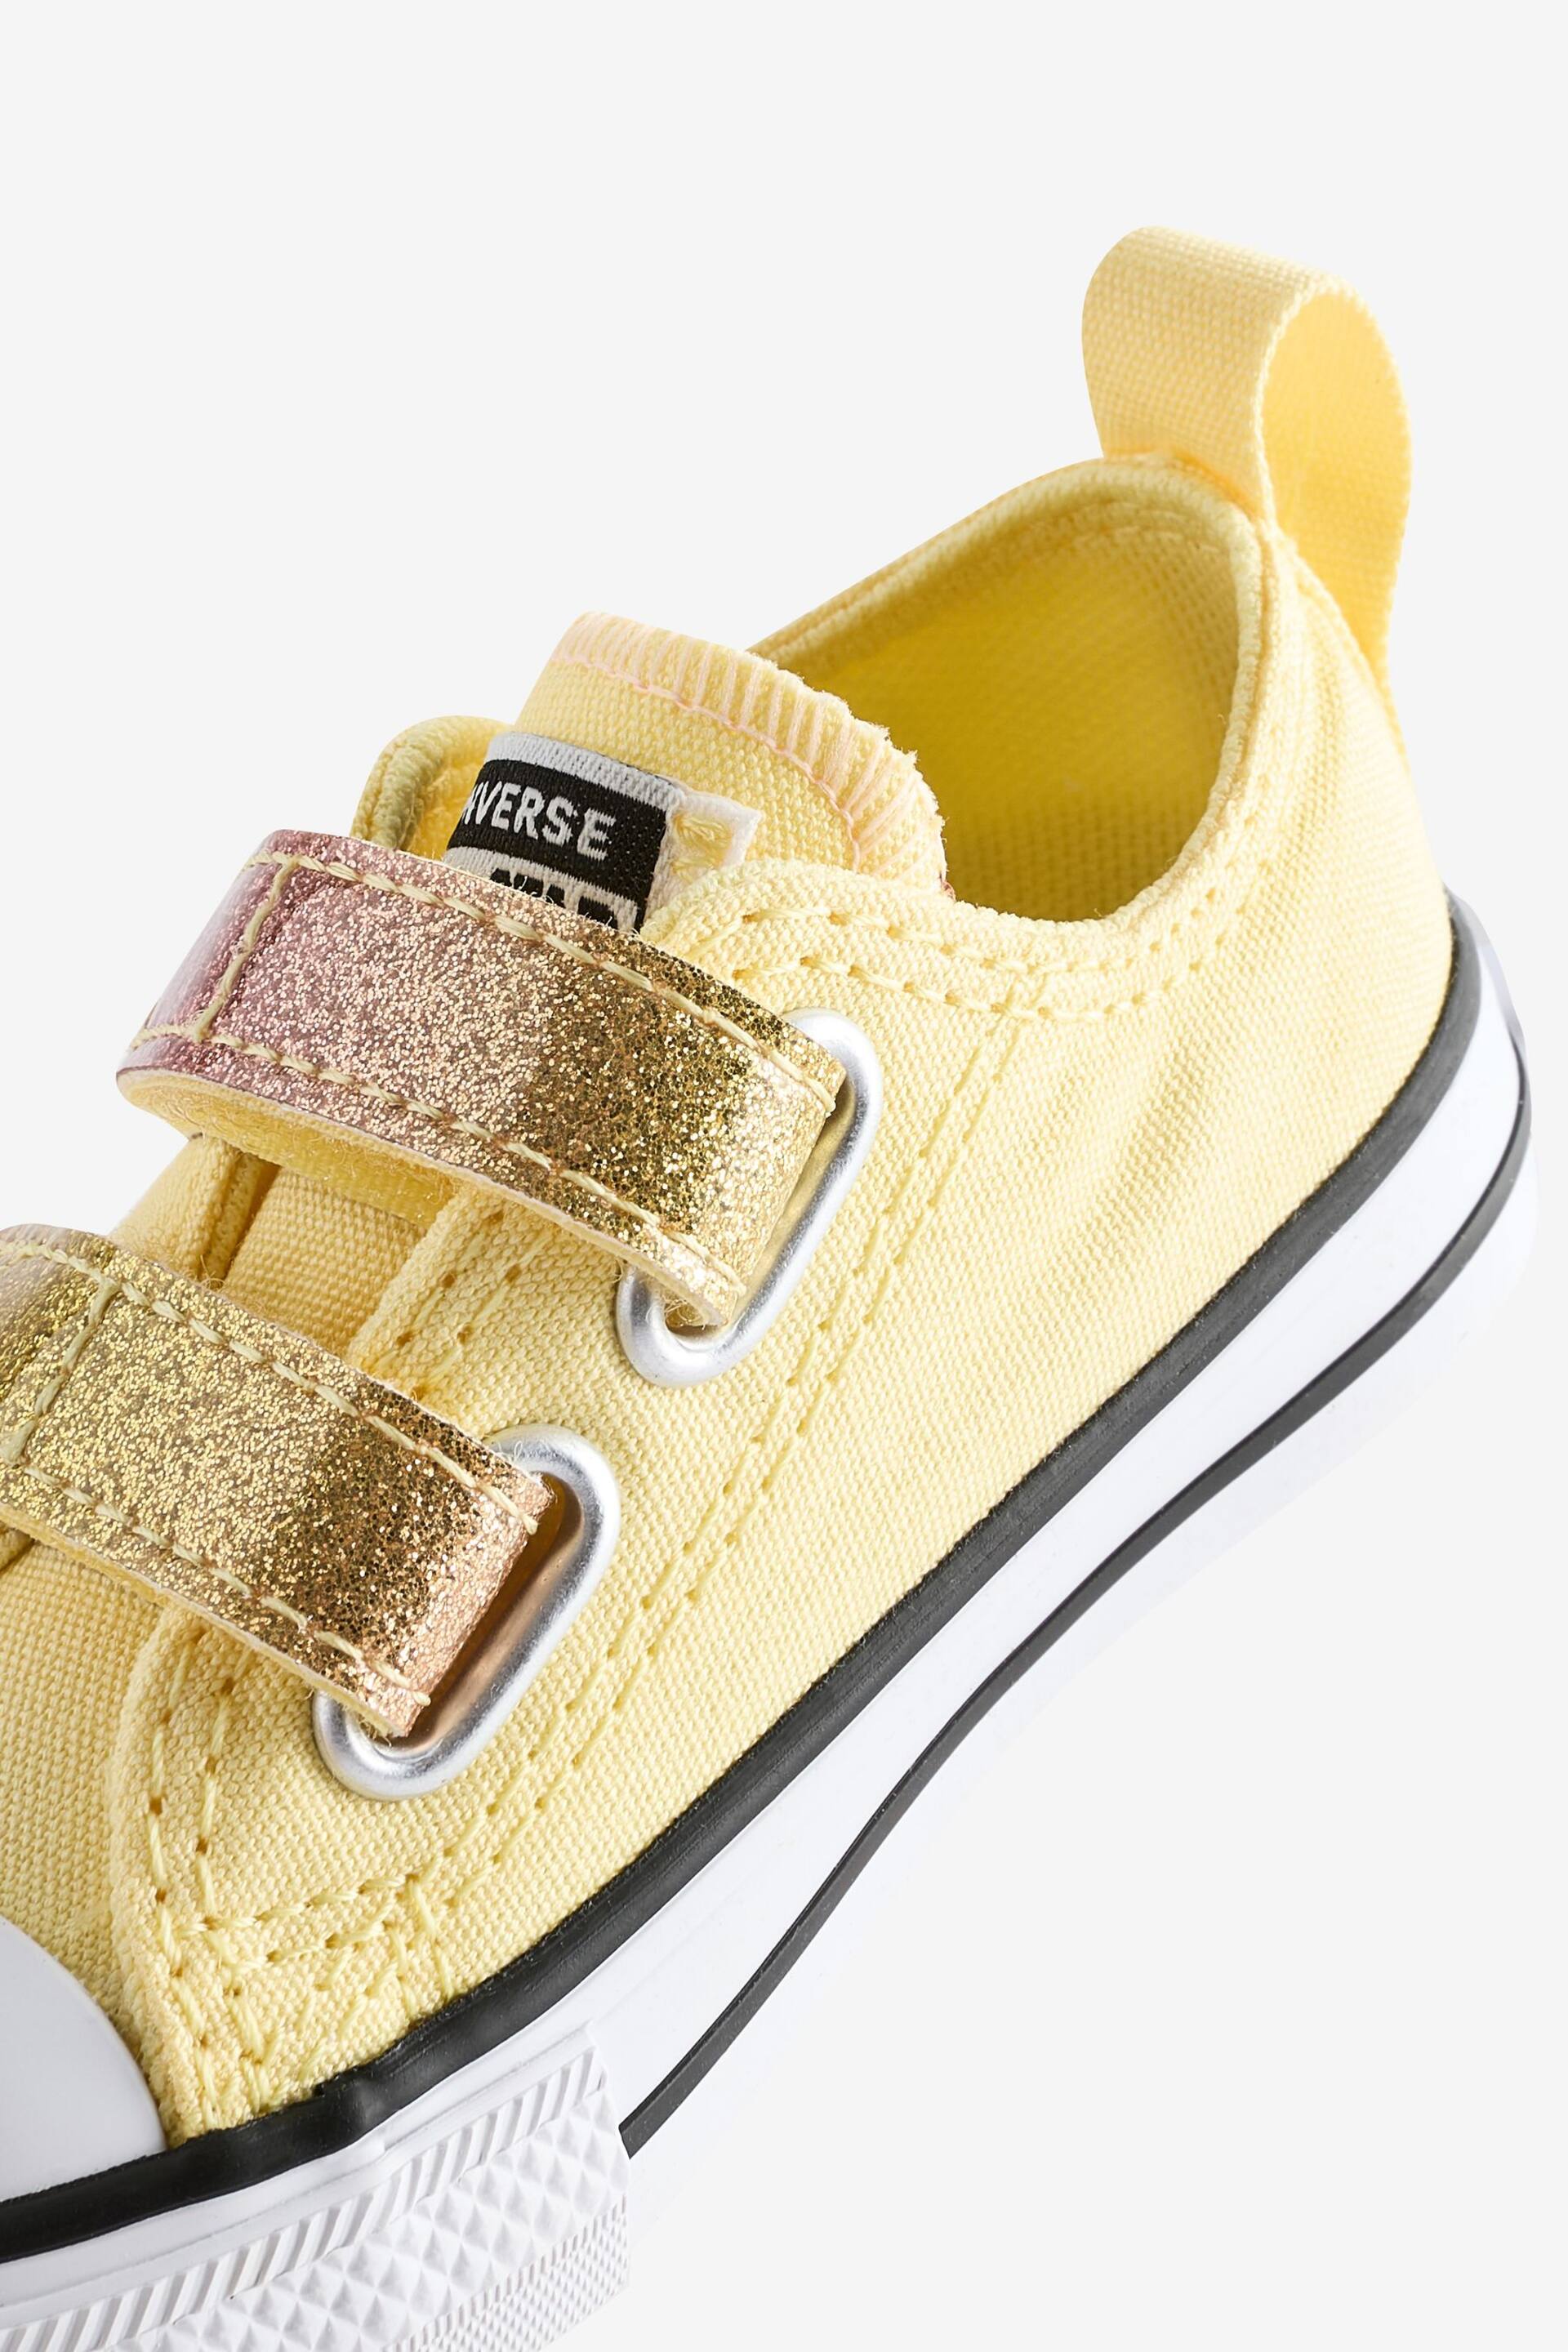 Converse Yellow Lemon Infant 2V Trainers - Image 8 of 9